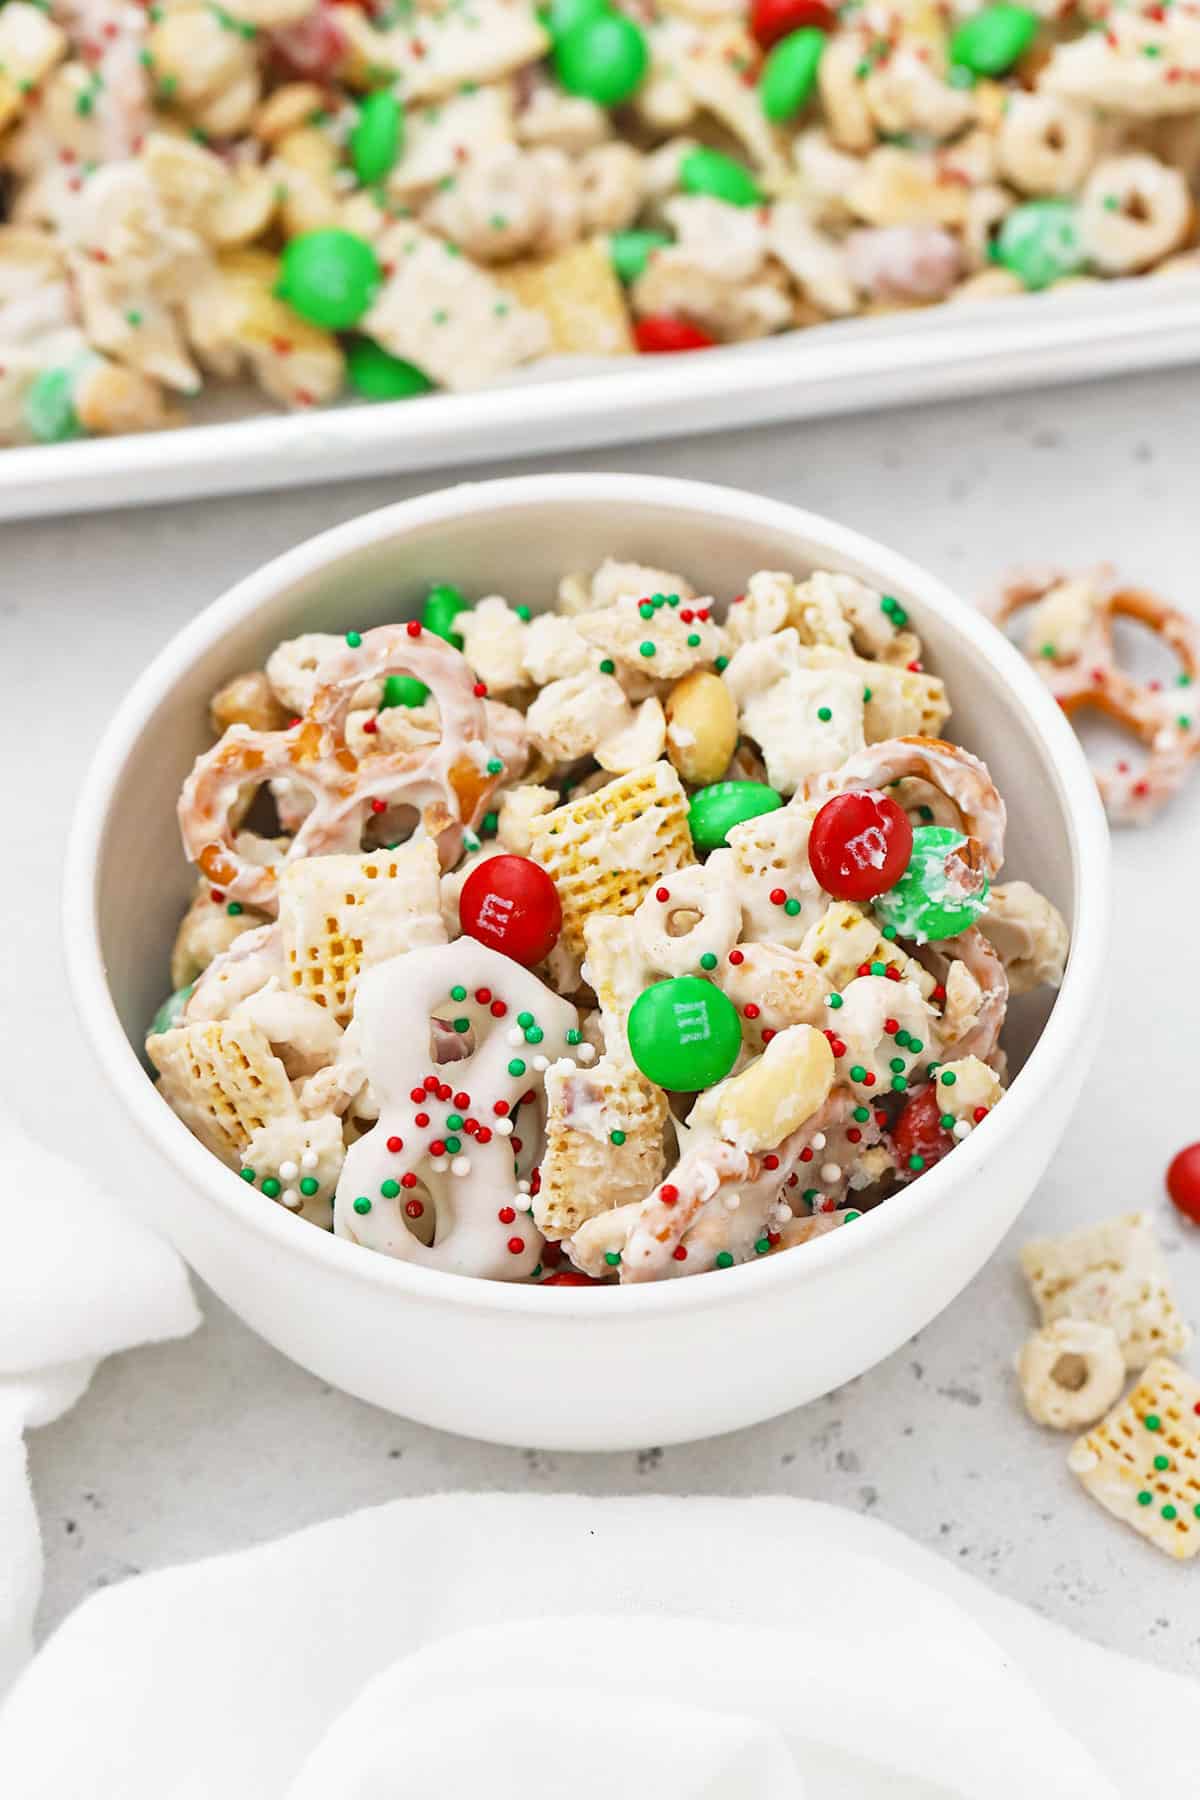 Large white bowl of gluten-free holiday chex mix with m&ms and pretzels